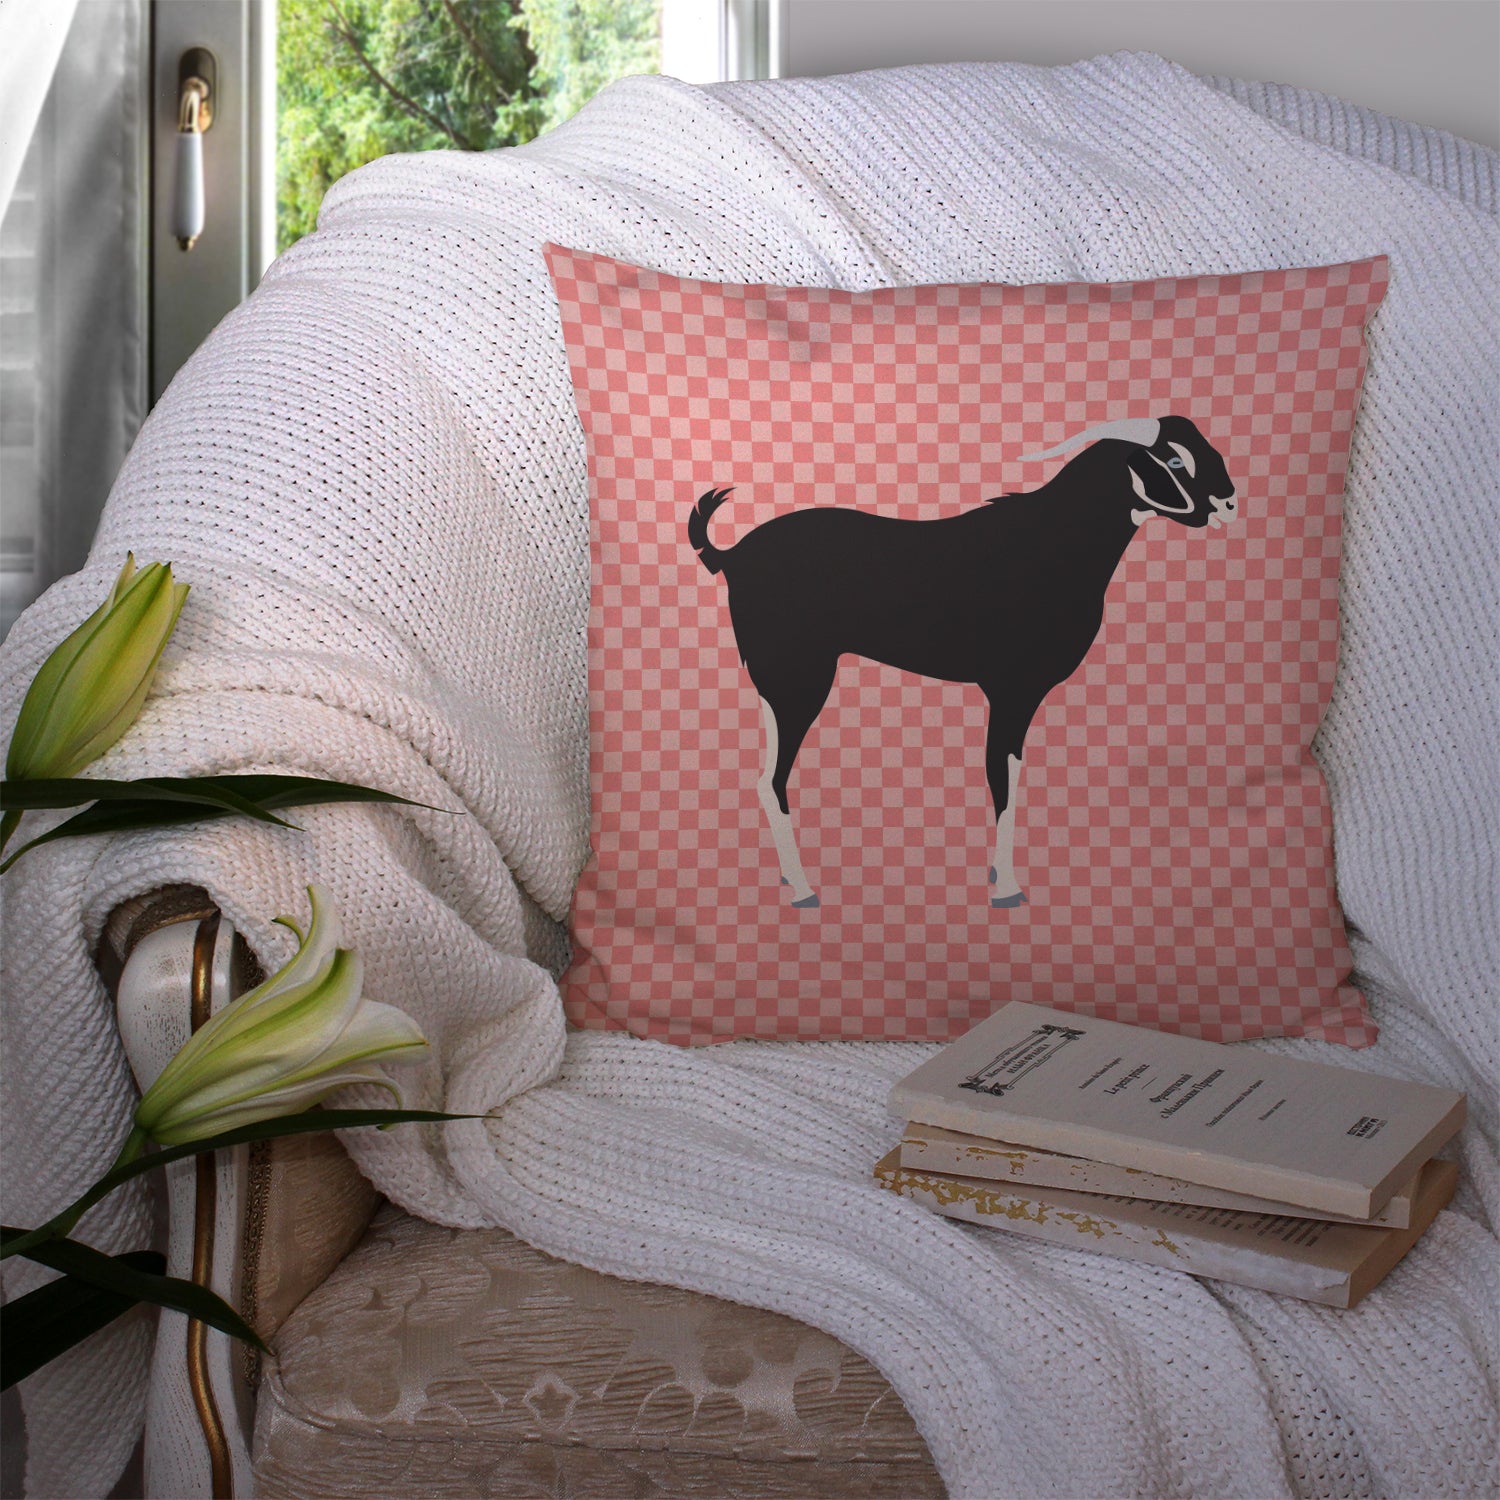 Black Bengal Goat Pink Check Fabric Decorative Pillow BB7884PW1414 - the-store.com